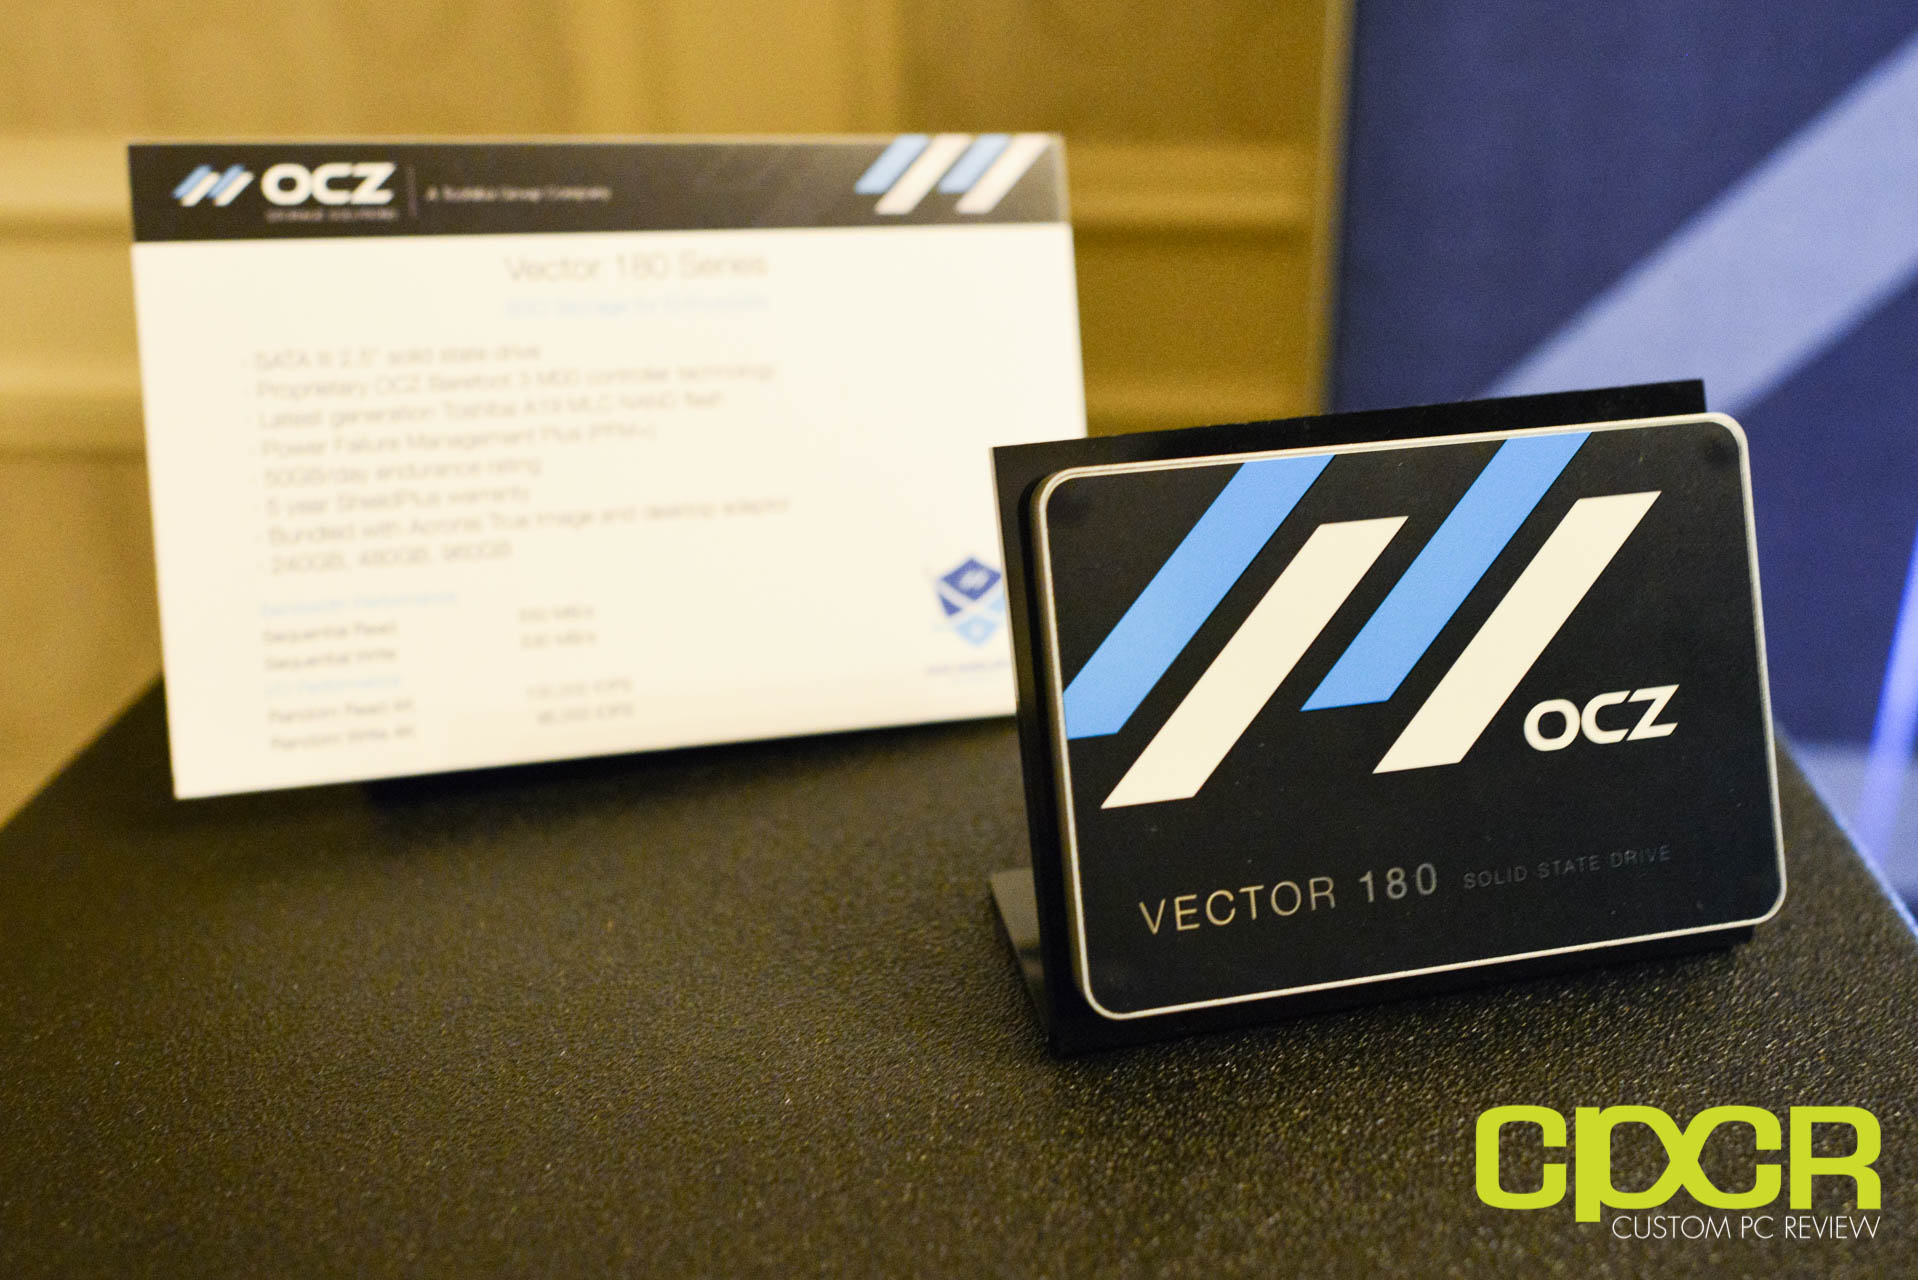 CES 2015: OCZ Displays Vector 180 Series SSD, Z-Drive 6000 NVMe SSD